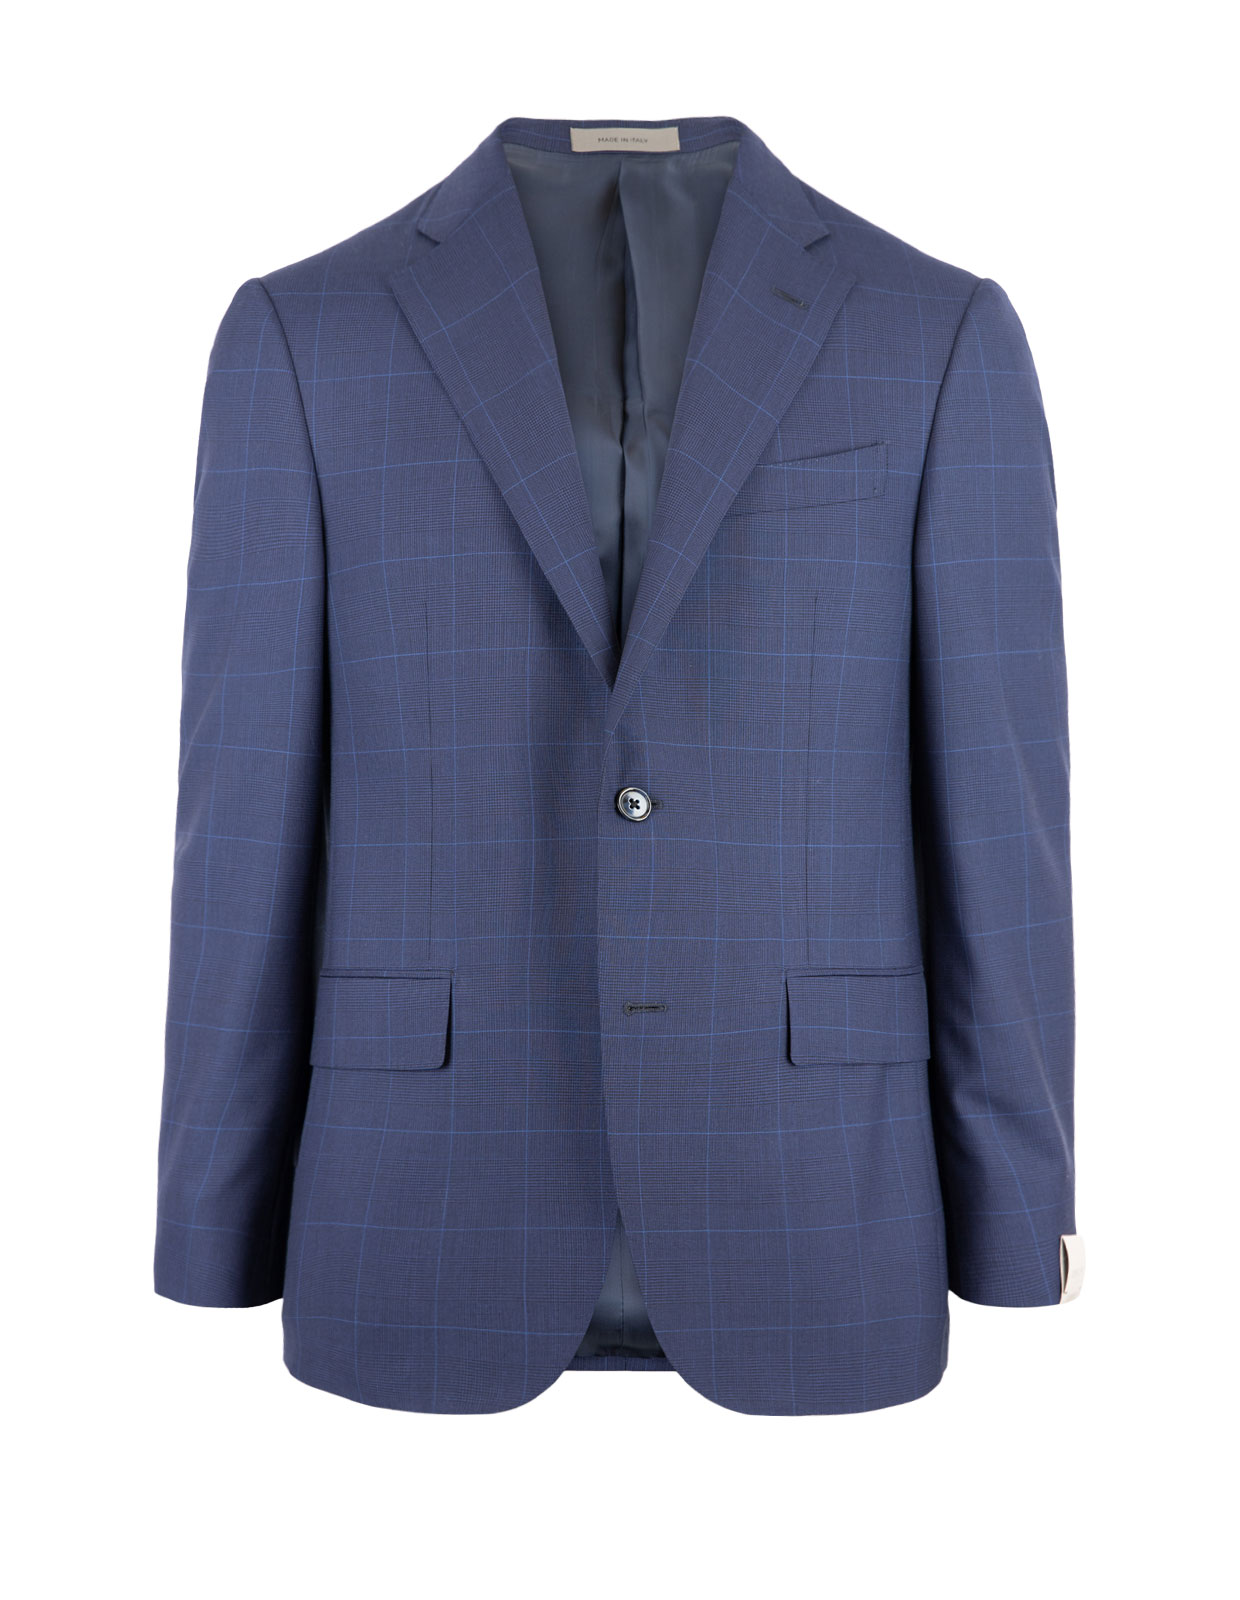 Leader Suit Wool Blue Check